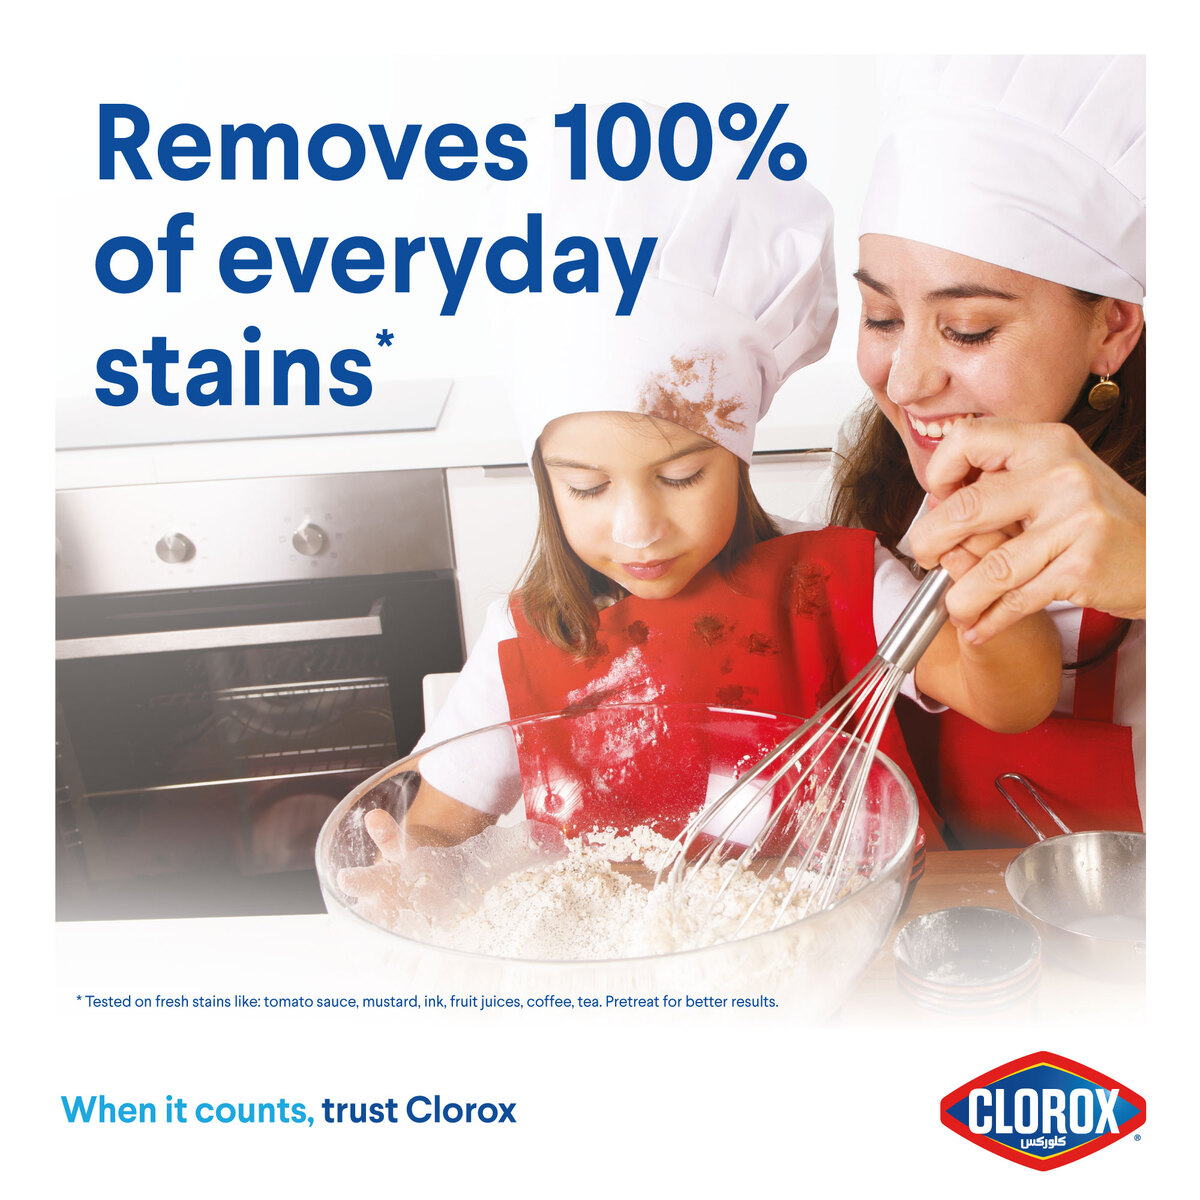 Clorox Powder Ultra Stain Remover & Color Booster For Colored Clothes 1 kg